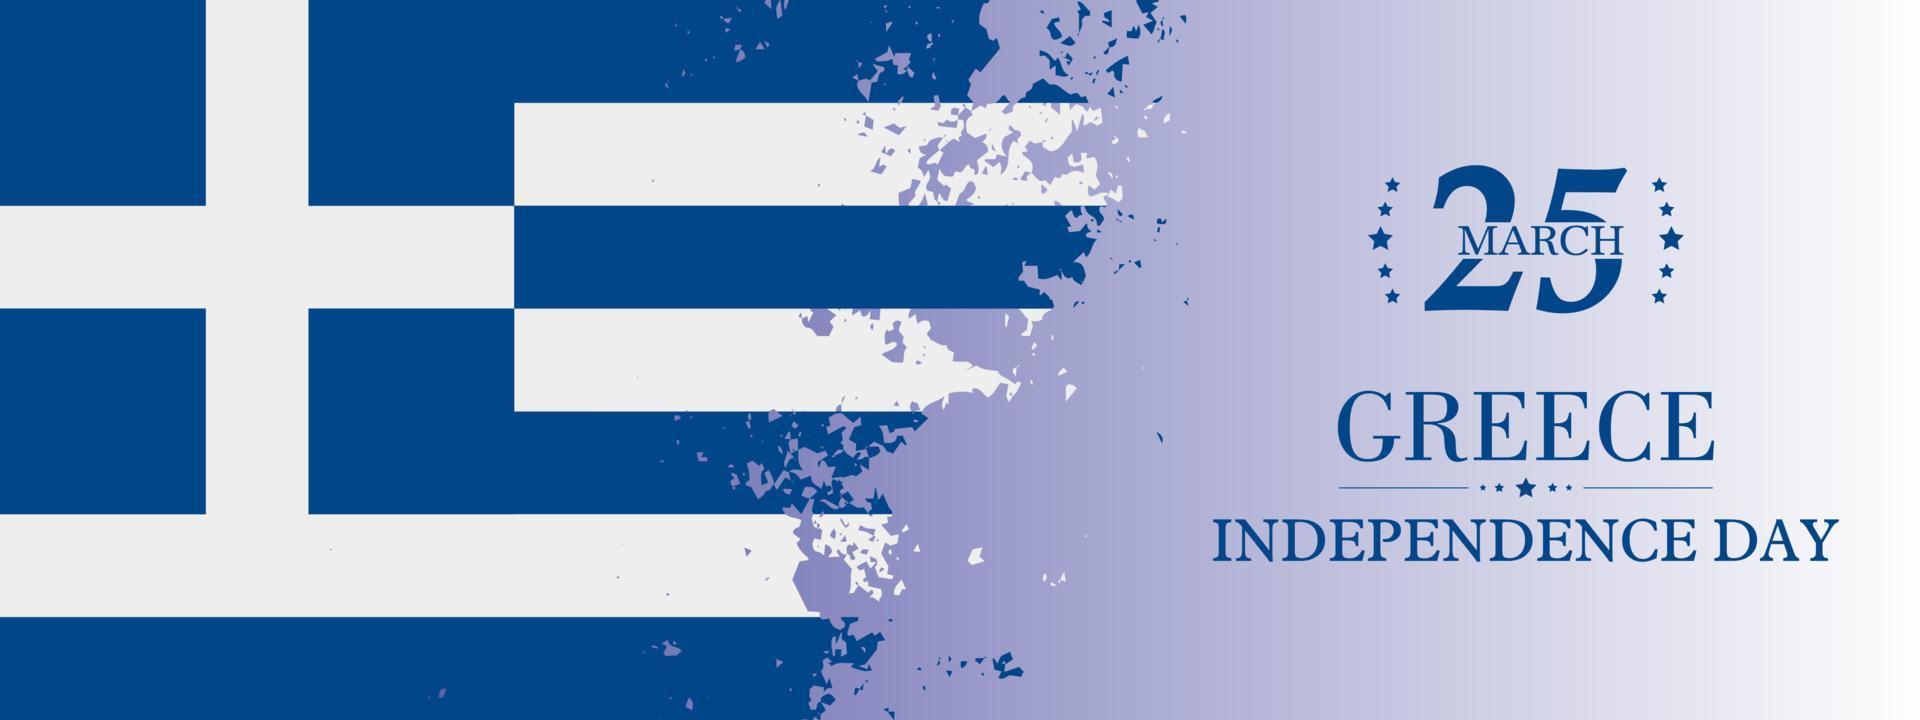 grunge texture of greece flag banner, greek independence day on 25 march. vector illustration